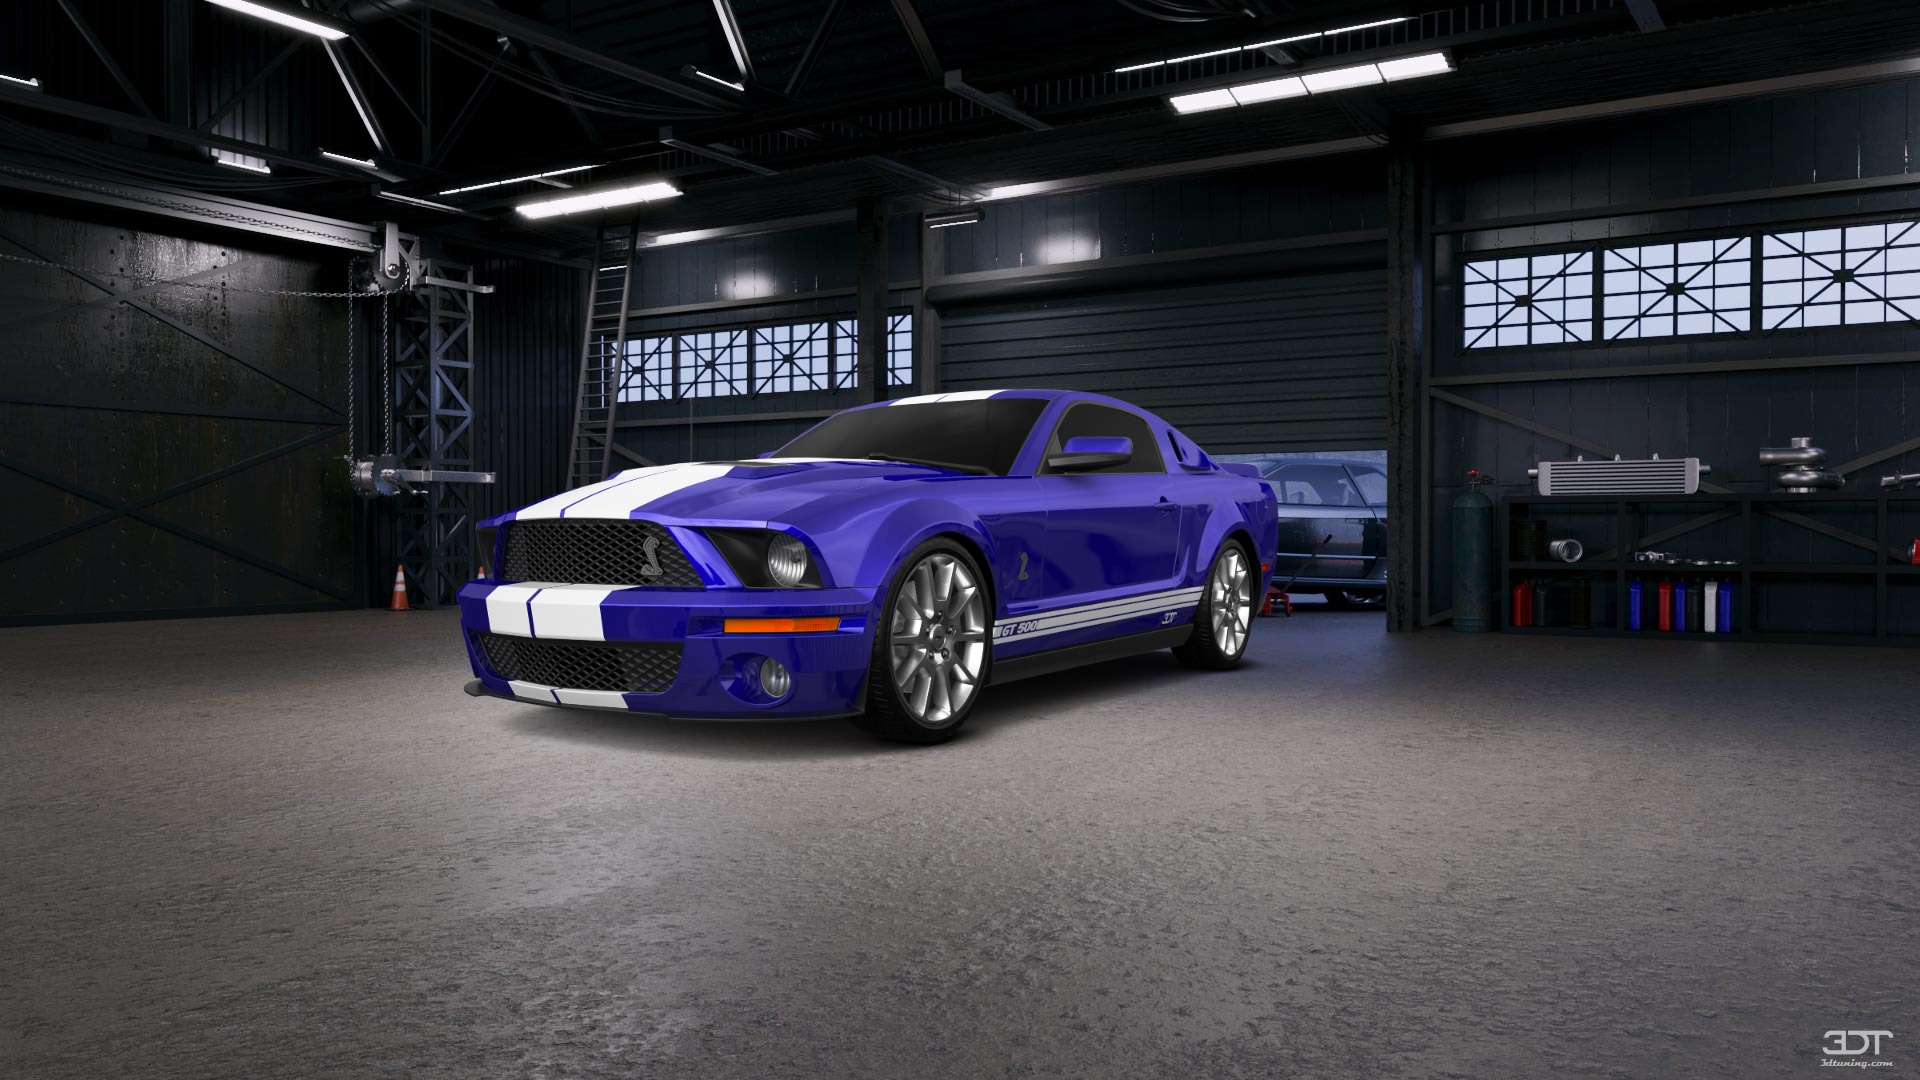 Ford Mustang 2 Door Coupe 2006 tuning